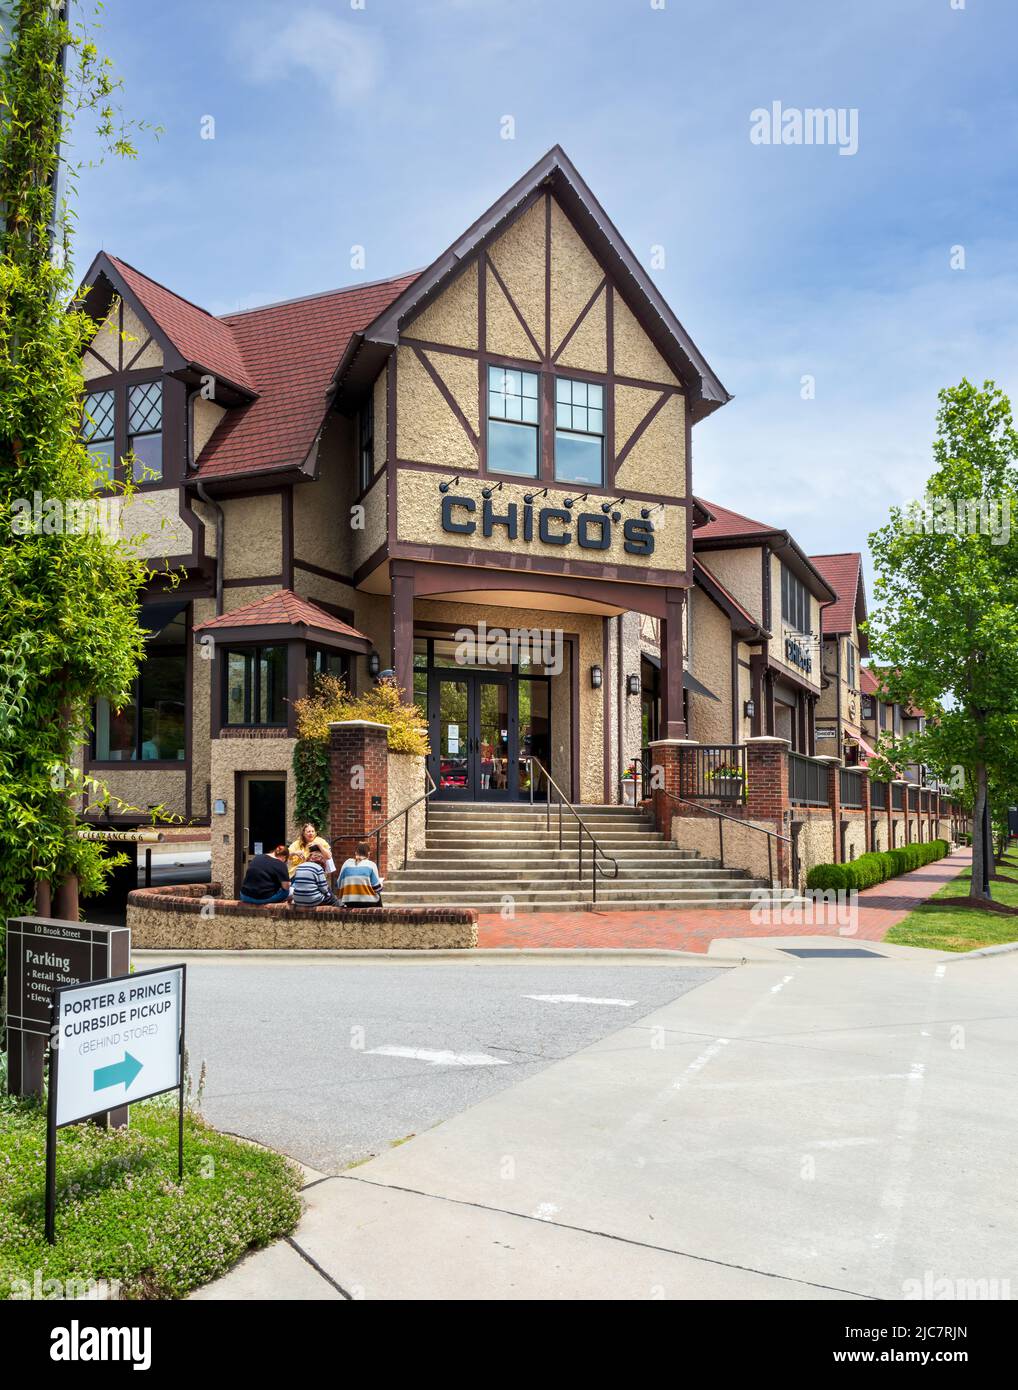 BILTMORE VILLAGE in ASHEVILLE, NC, USA-5 JUNE 2022: Chico's Clothing Store, Entrance and Chalet architecture. 4 Personen vorne. Stockfoto